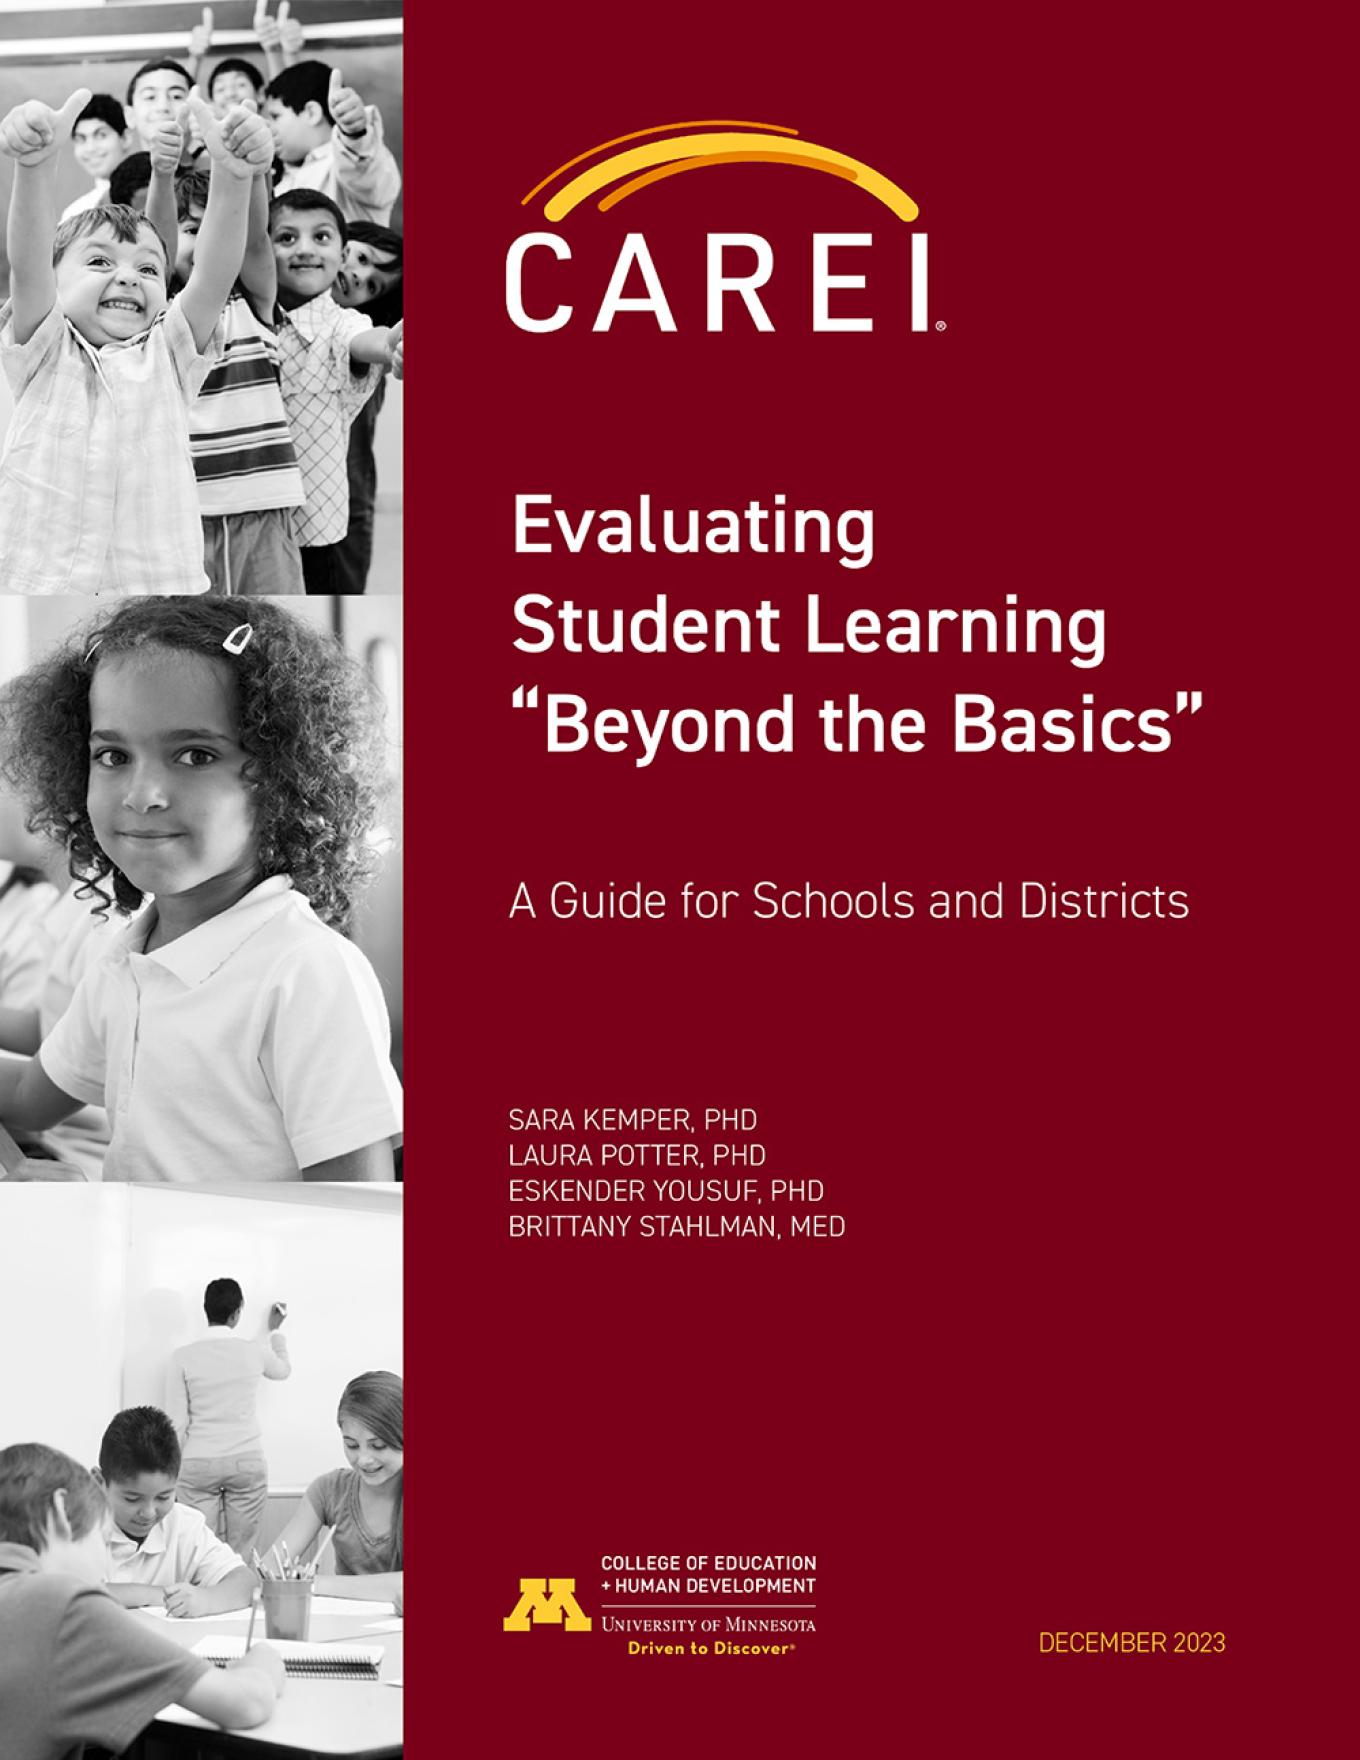 carei evaluating student learning "beyond the basics" a guide for schools and districts